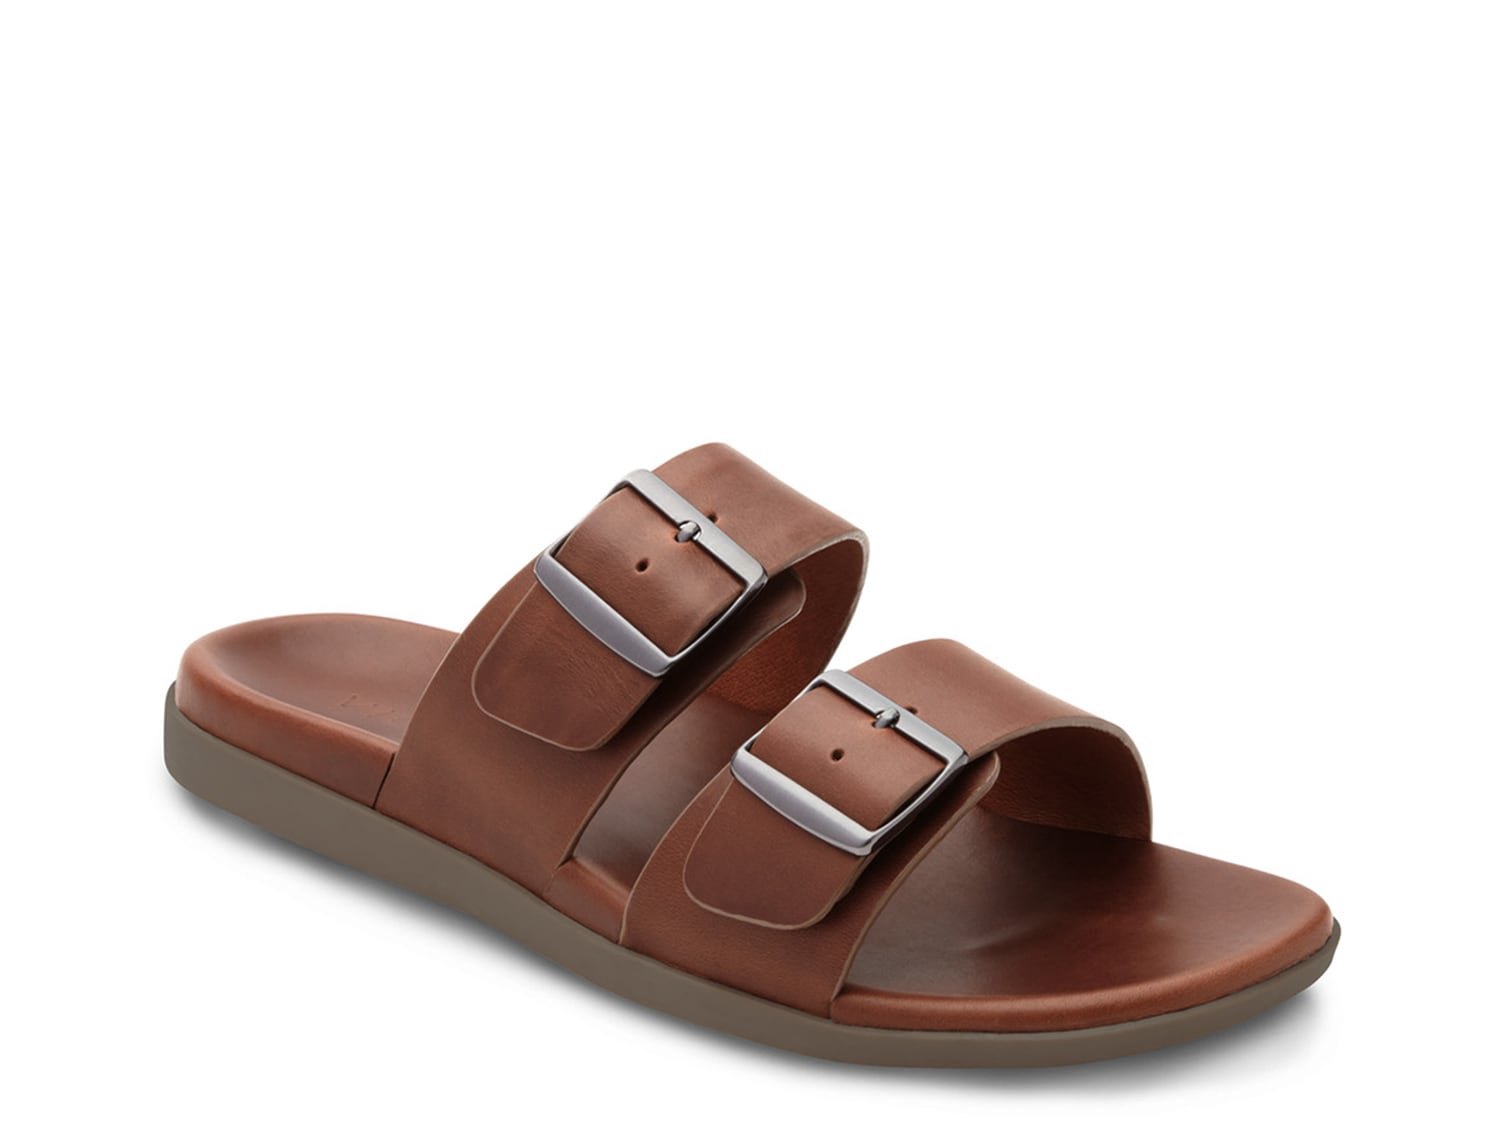 Vionic Shoes | Sandals, Slippers 